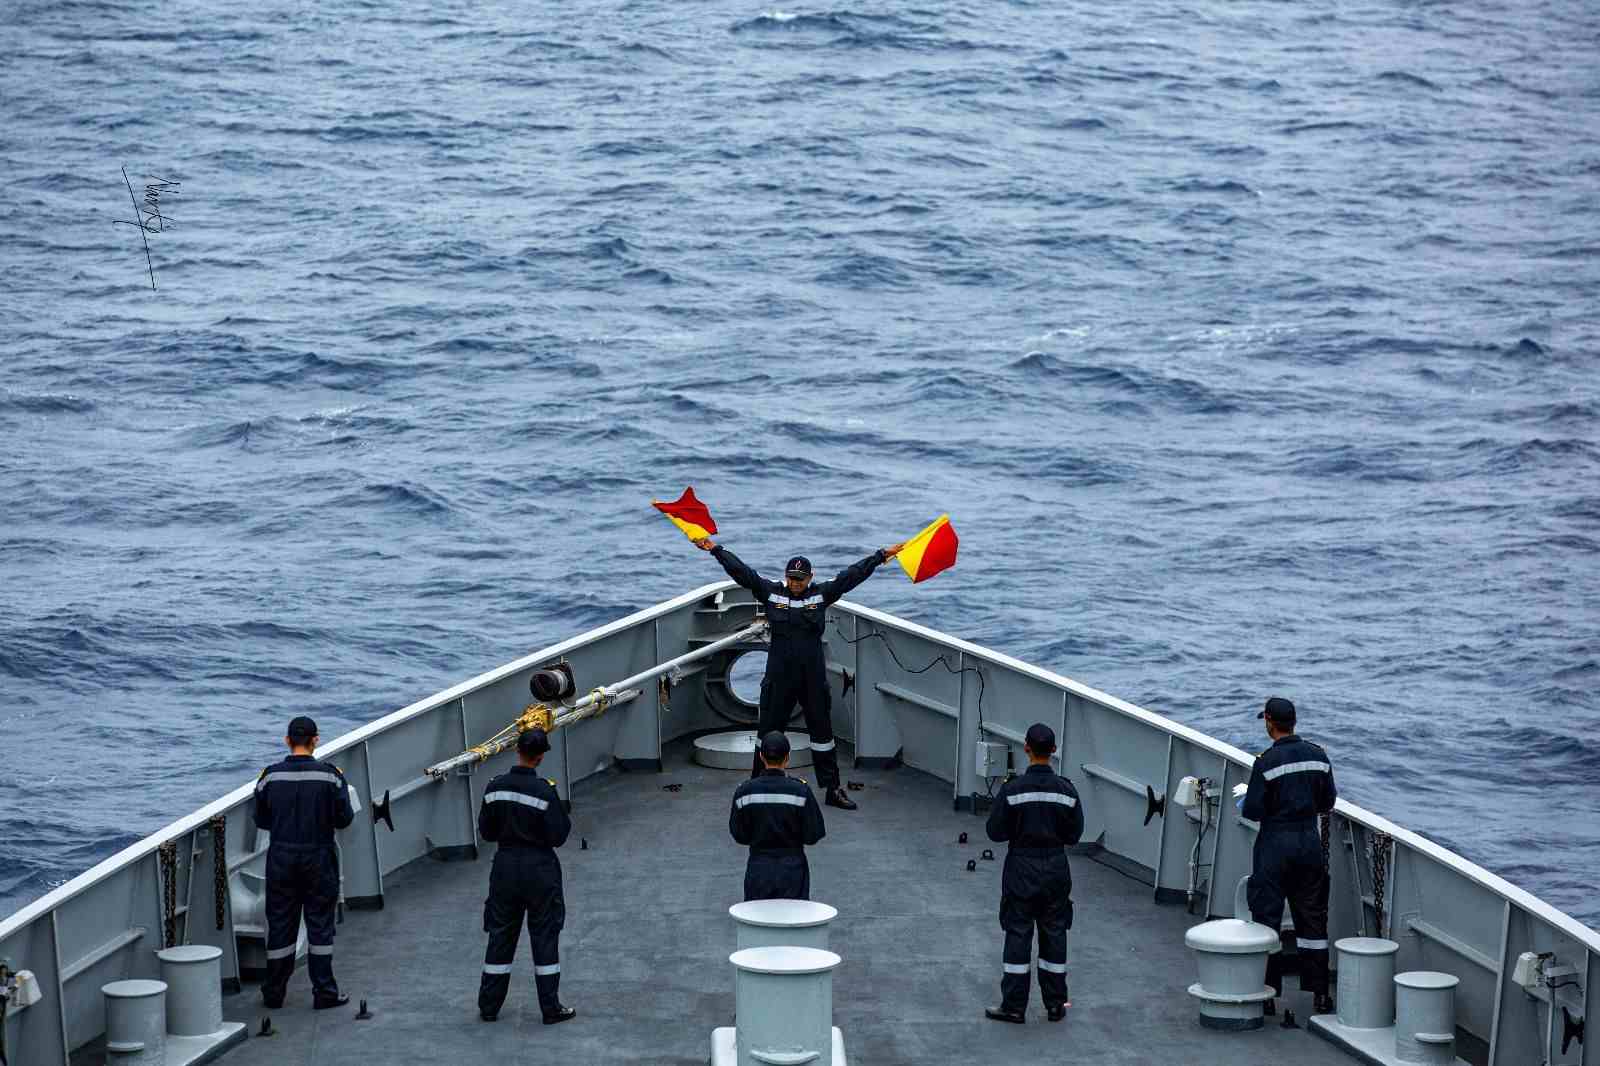 Semaphore, a visual communication language is crucial for navy operations